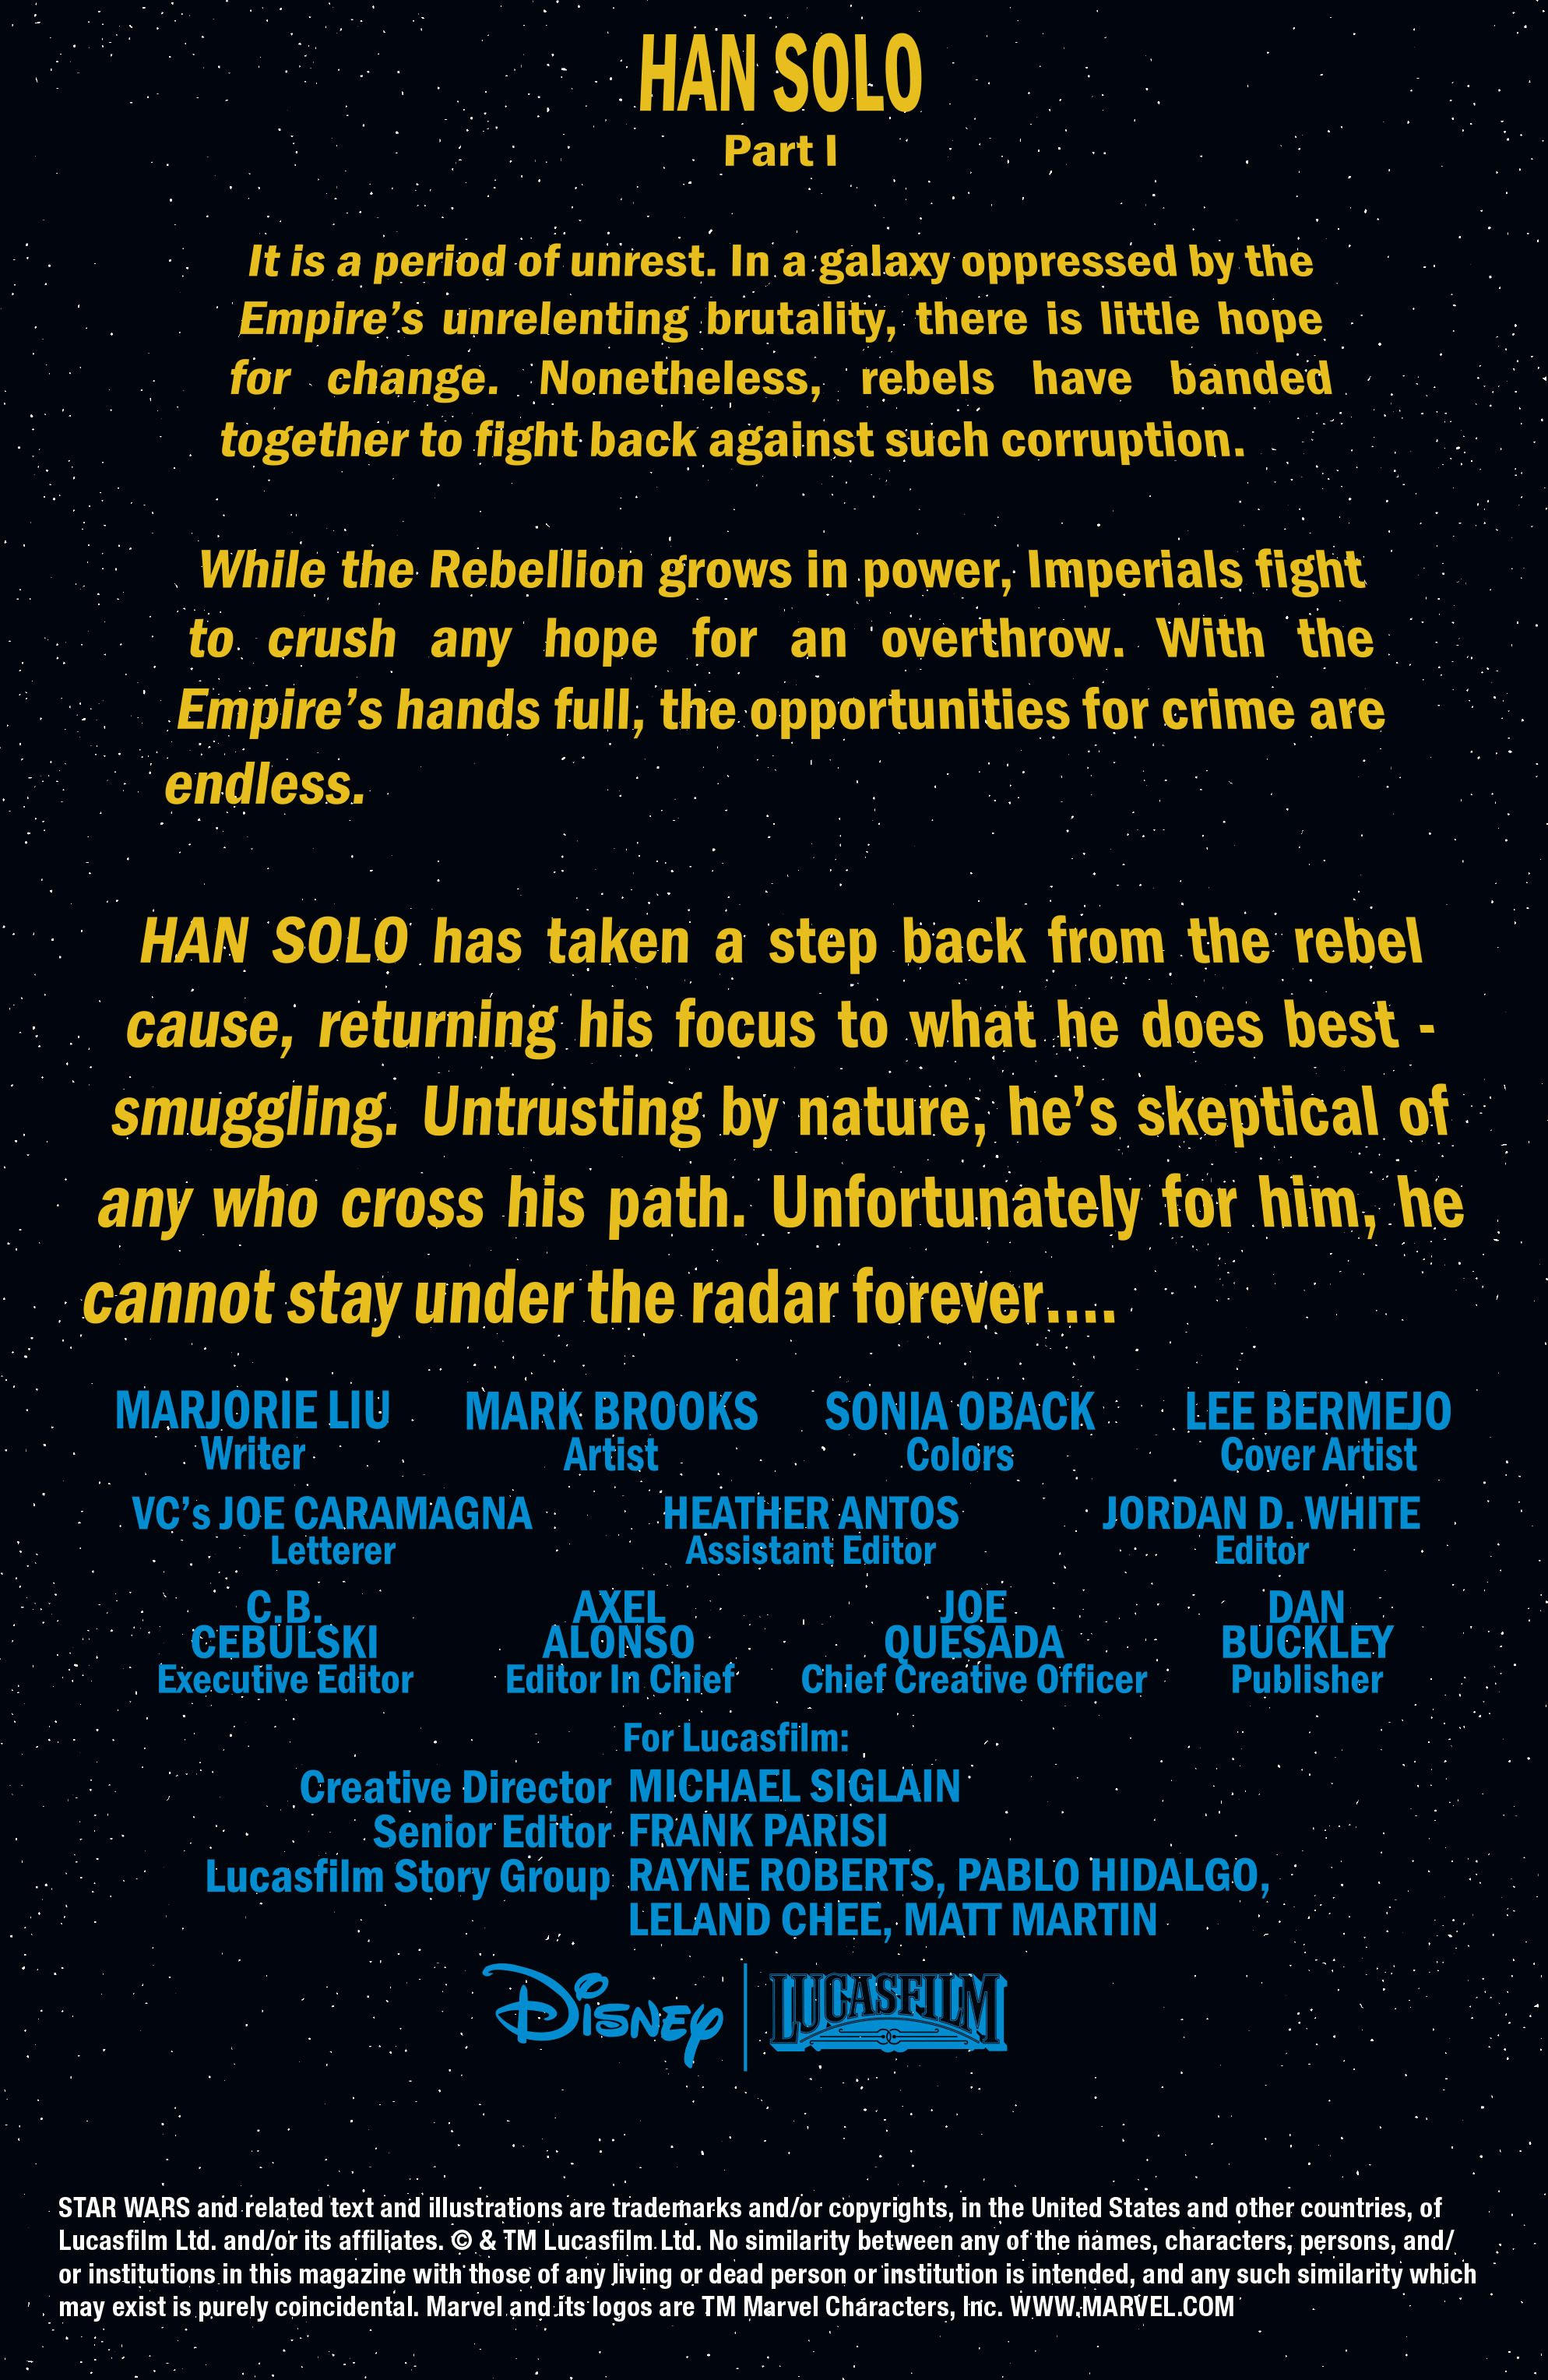 Read online Han Solo comic -  Issue #1 - 2